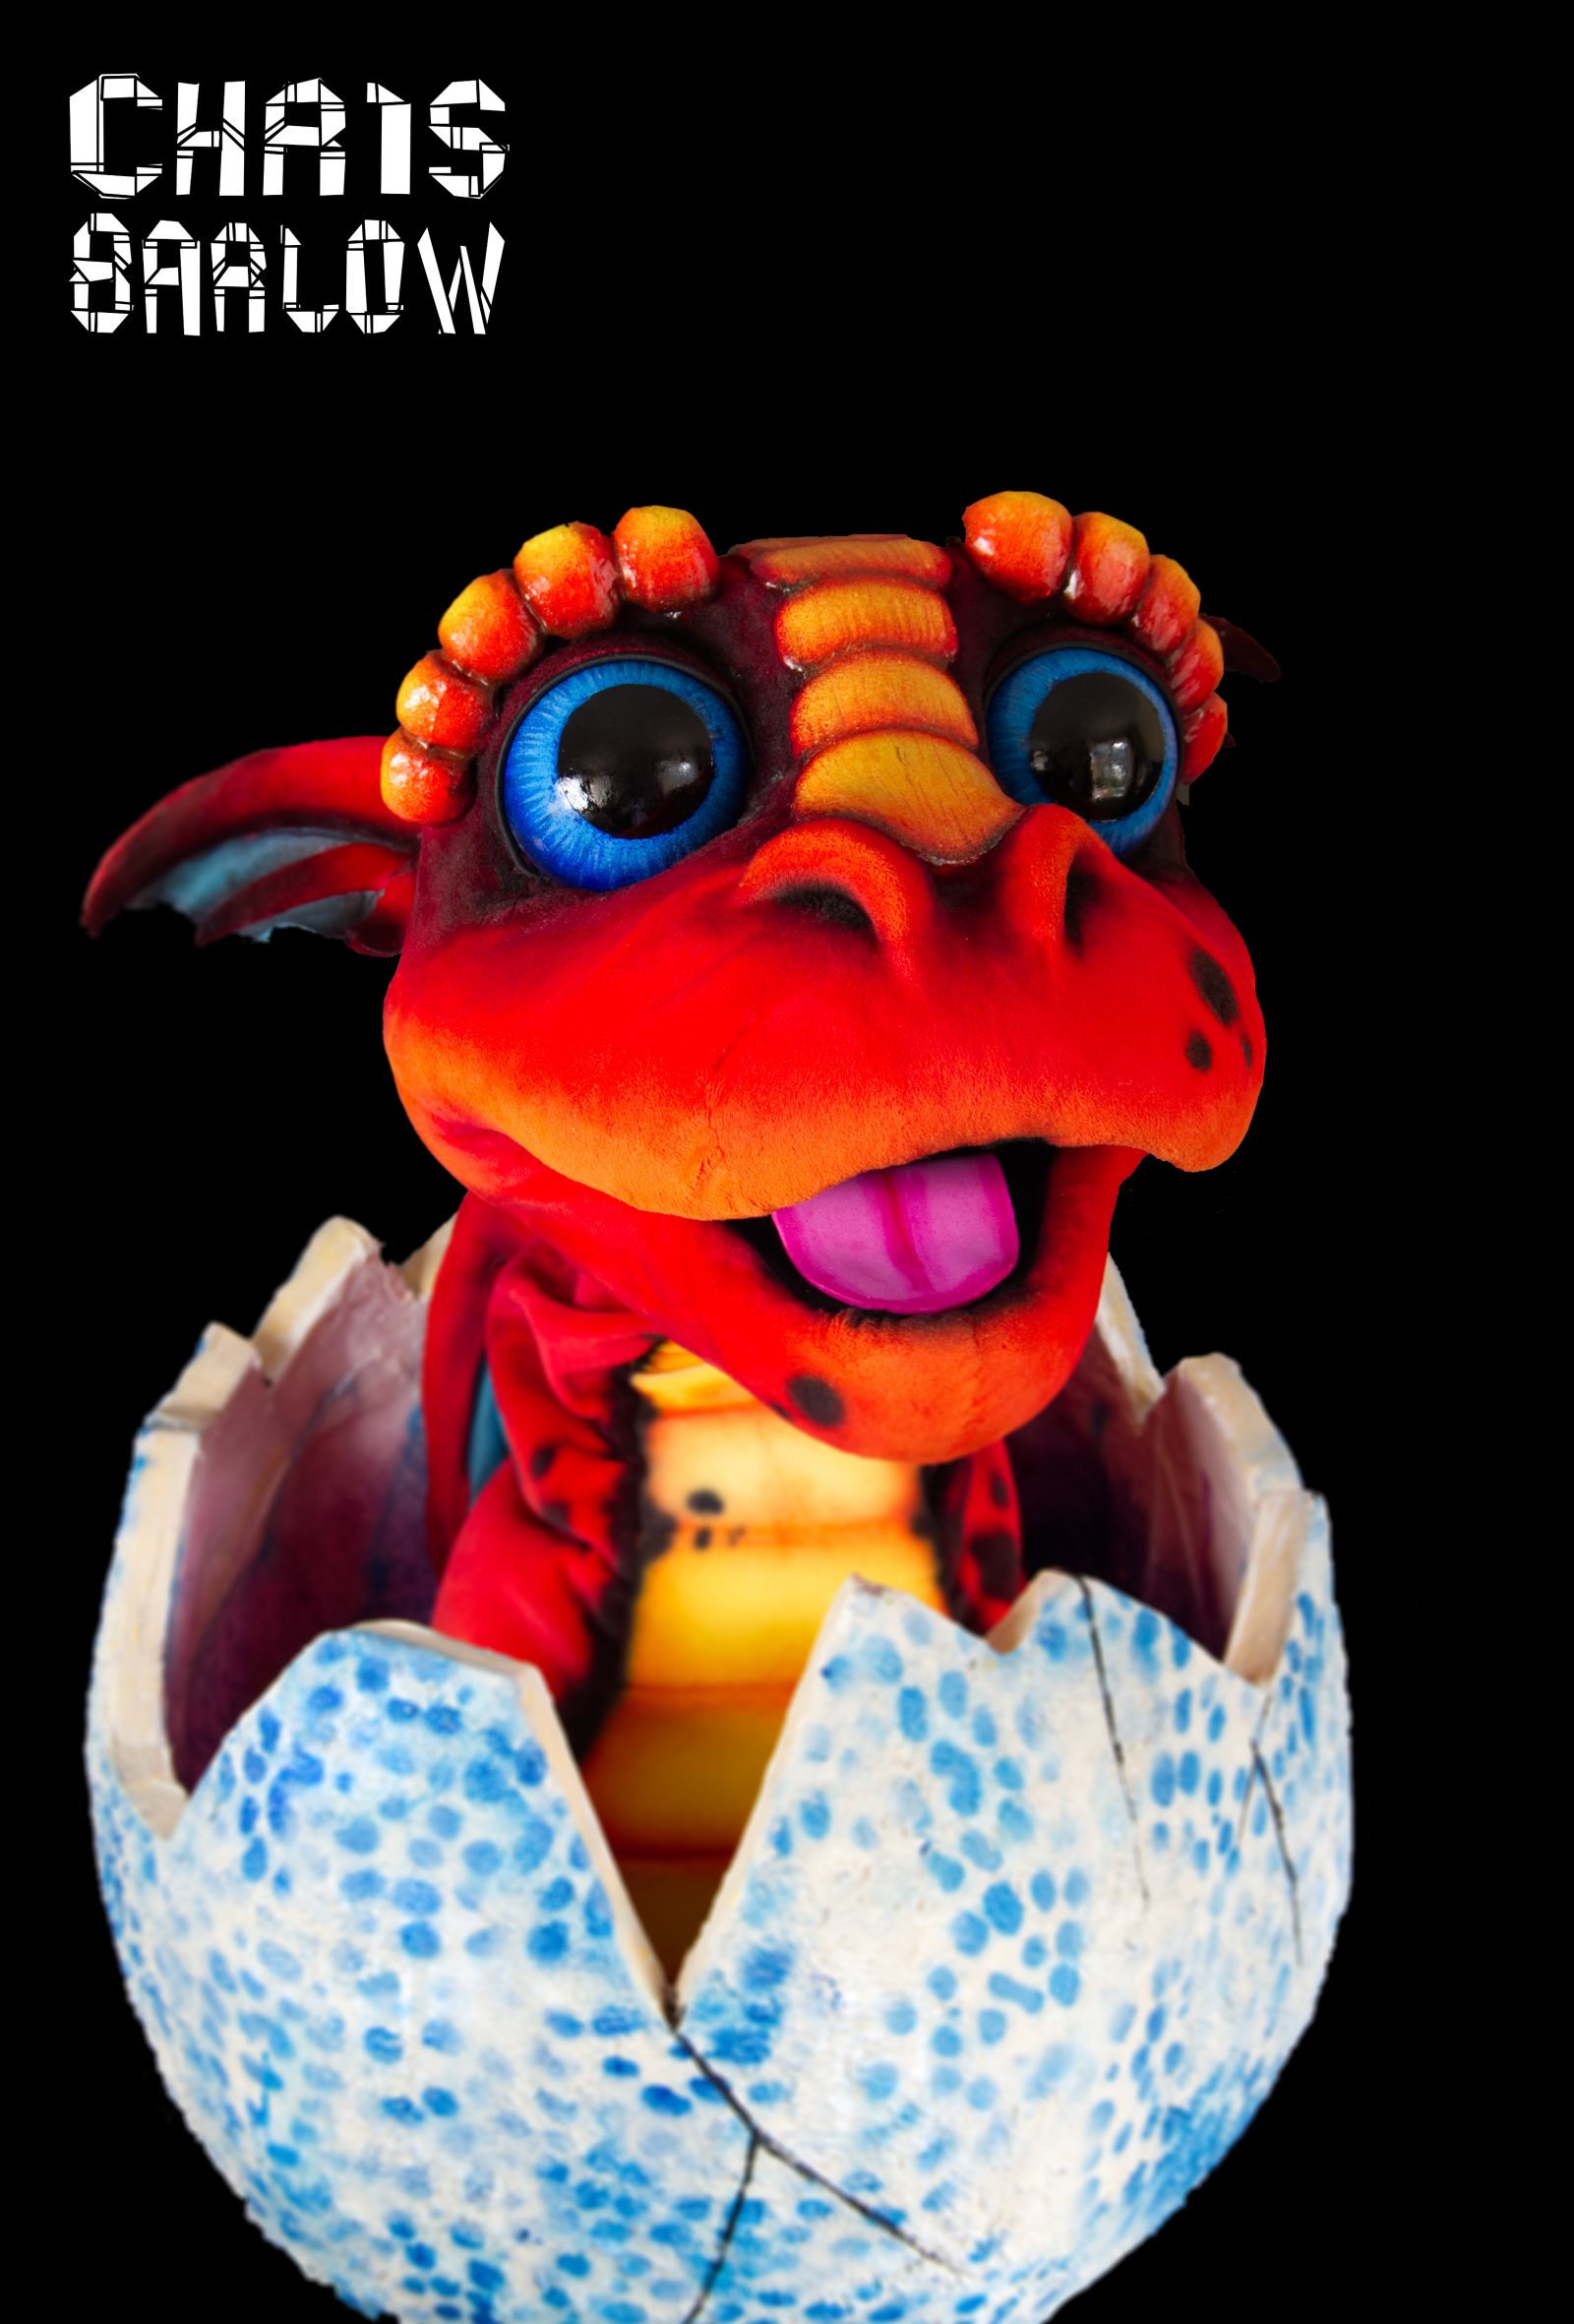 example of the Baby dragon puppet